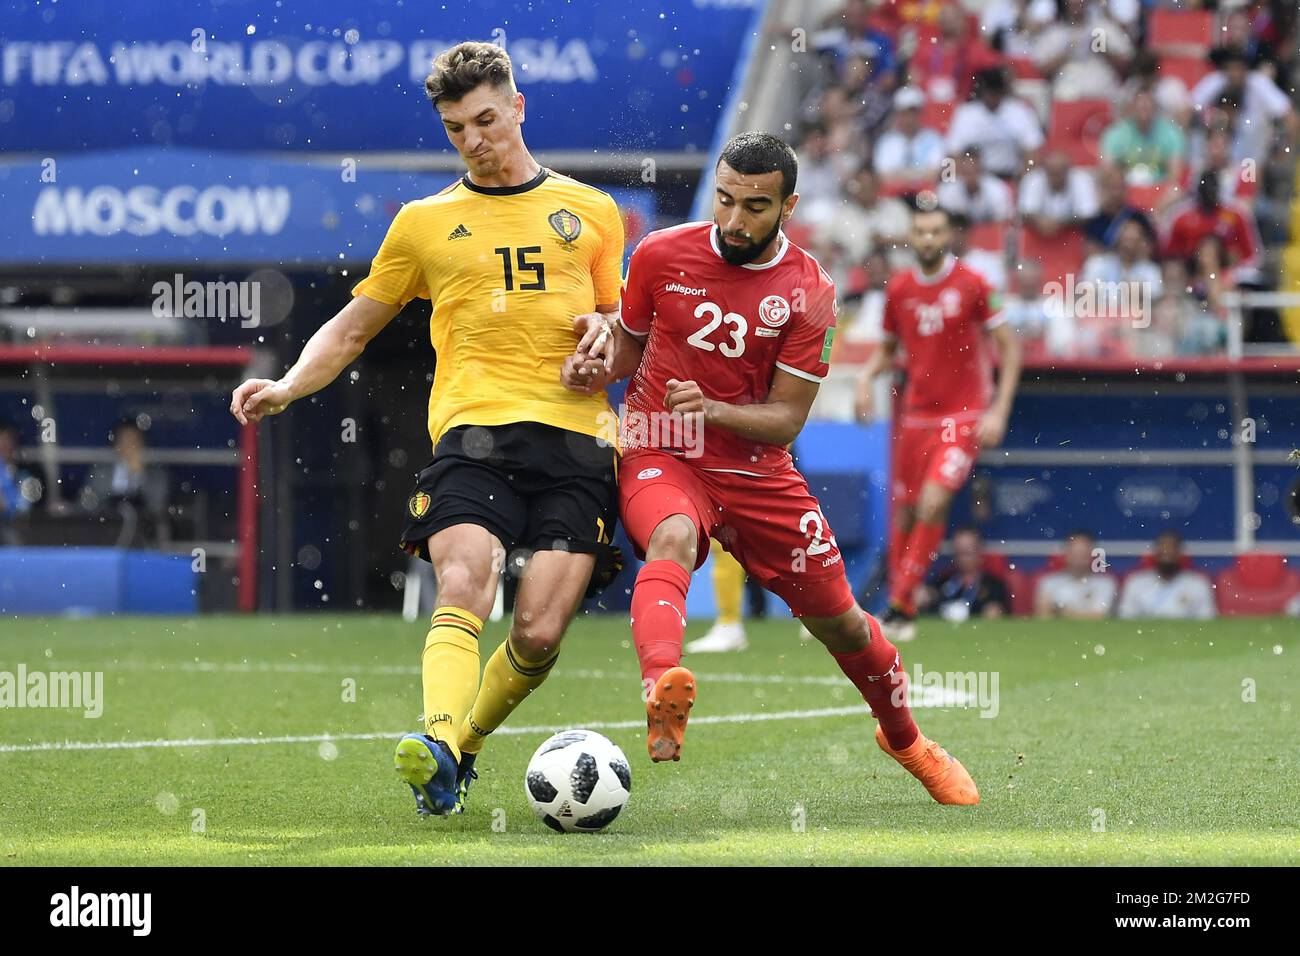 Belgium's Thomas Meunier and Tunesia's Naim Sliti fight for the ball during the second game of Belgian national soccer team the Red Devils against Tunisia national team in the Spartak stadium, in Moscow, Russia, Saturday 23 June 2018. Belgium won its first group phase game. BELGA PHOTO DIRK WAEM Stock Photo